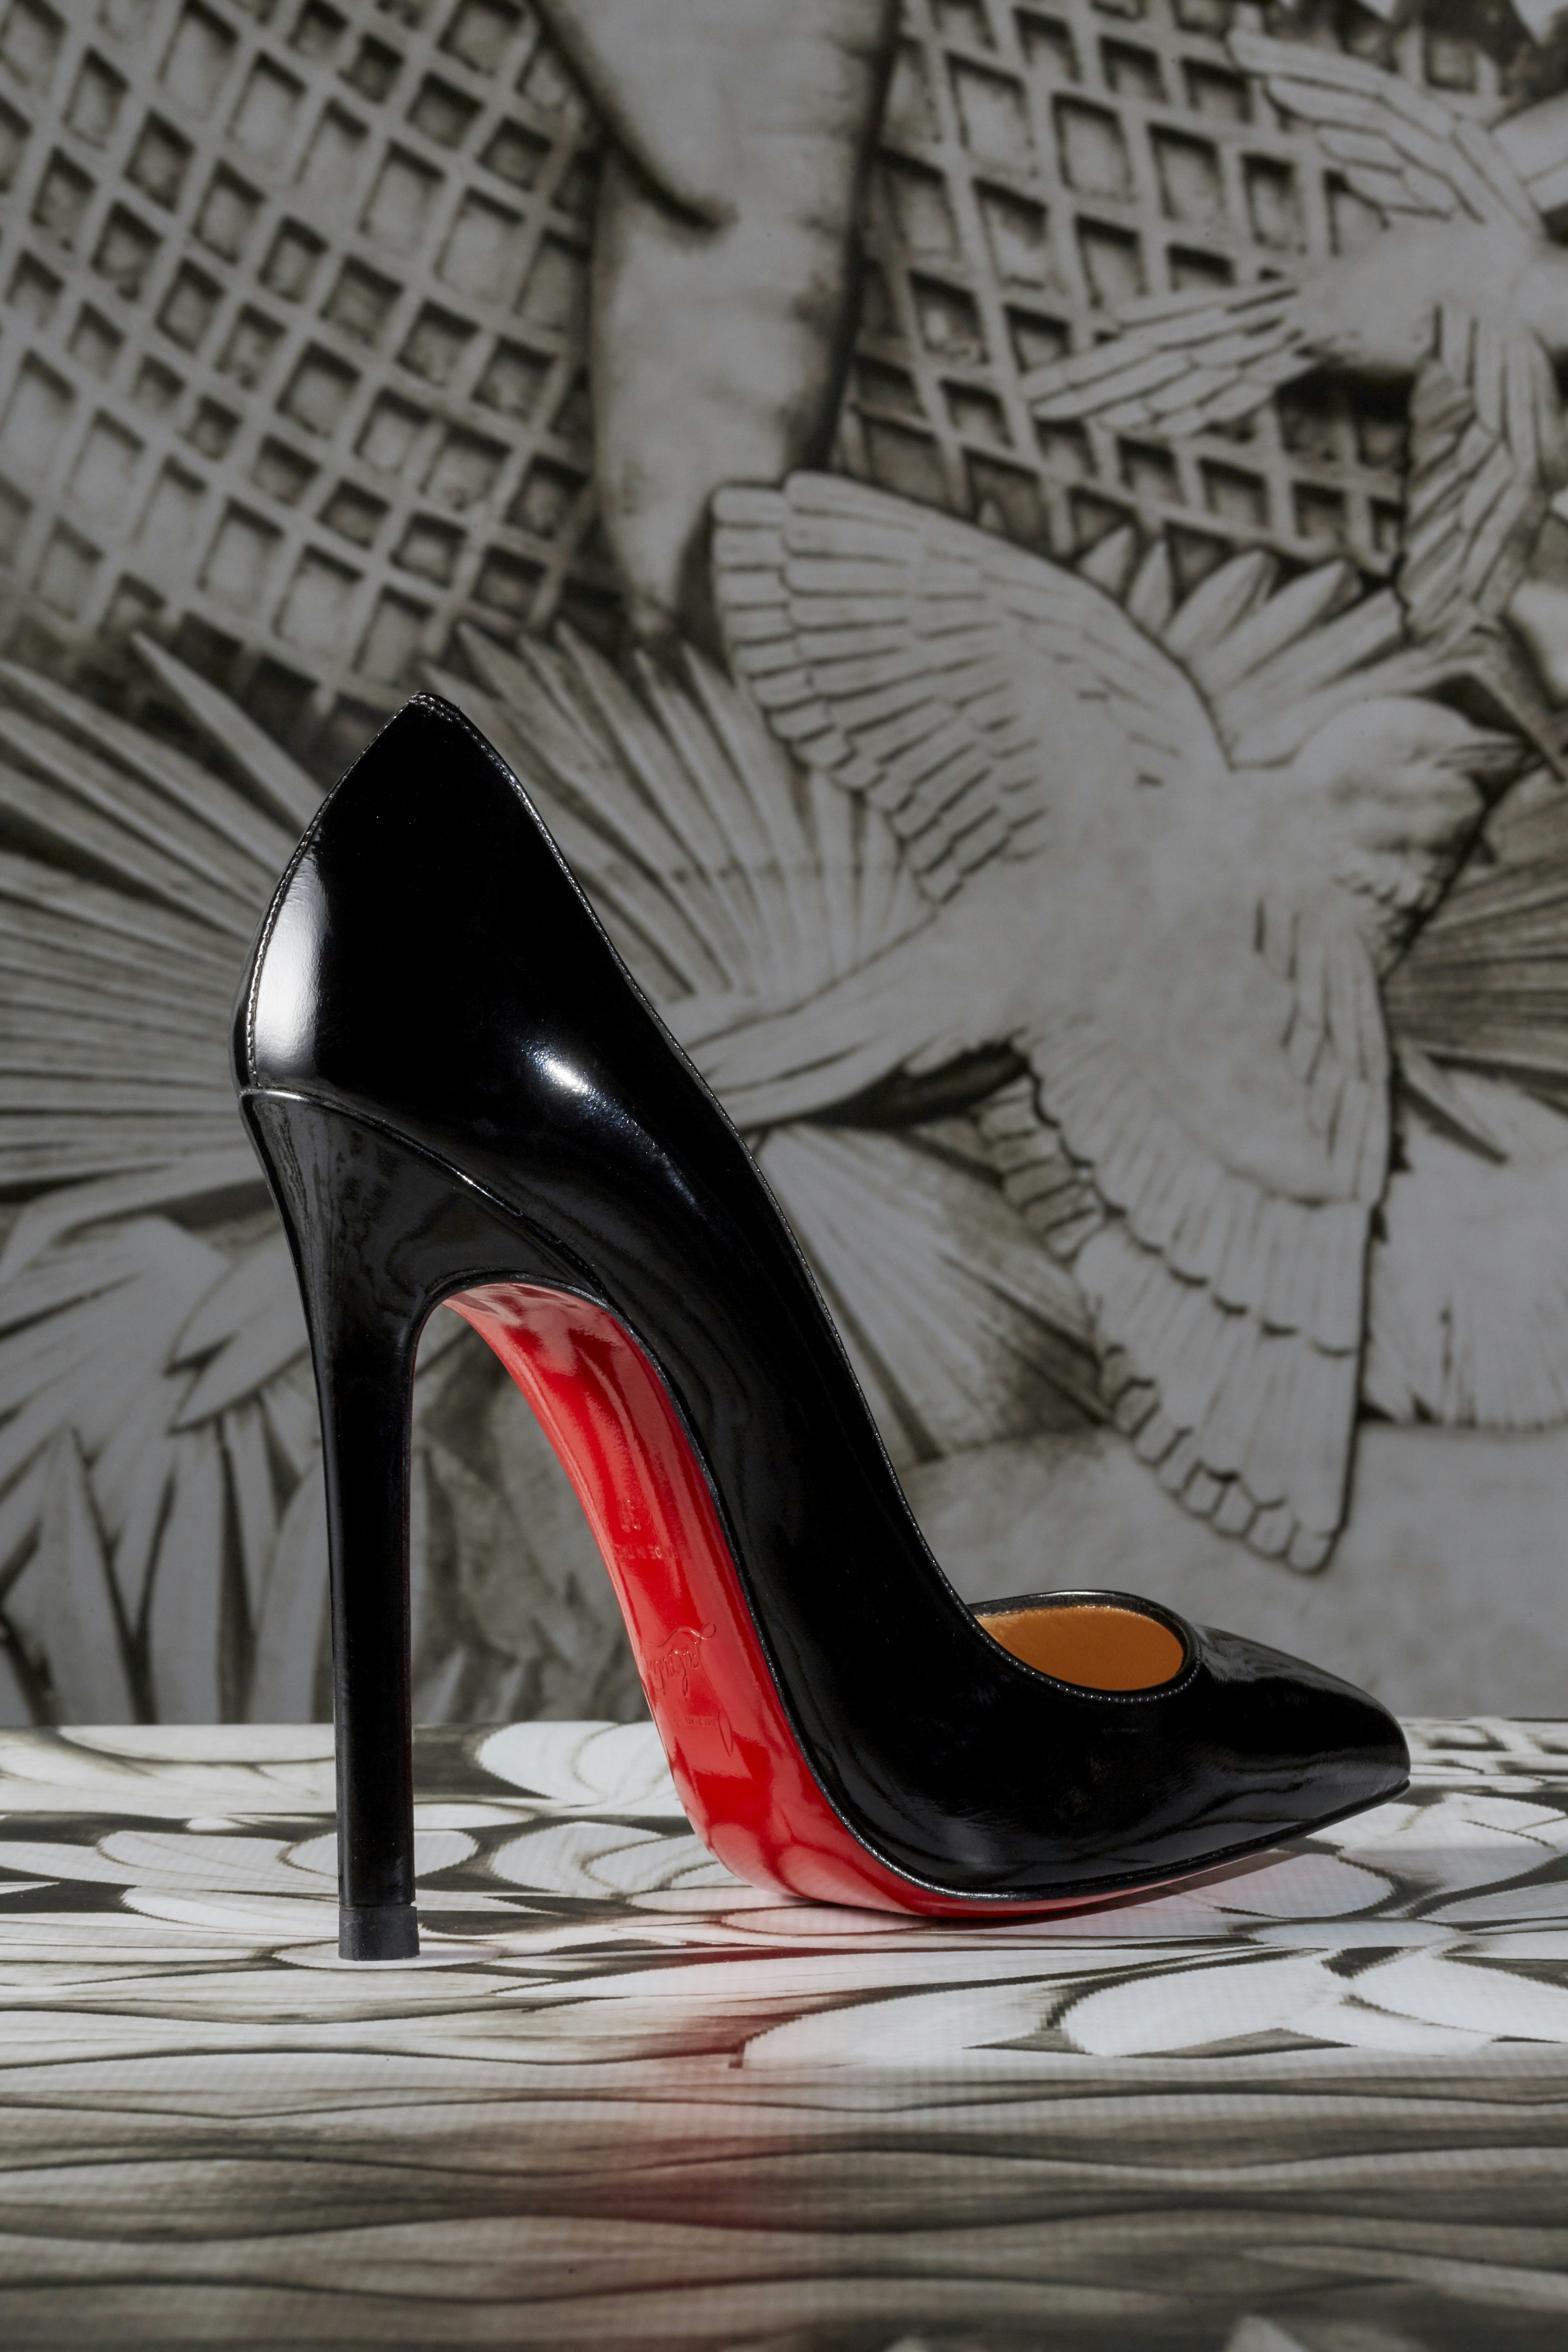 Christian Louboutin's iconic Pigalle shoe 